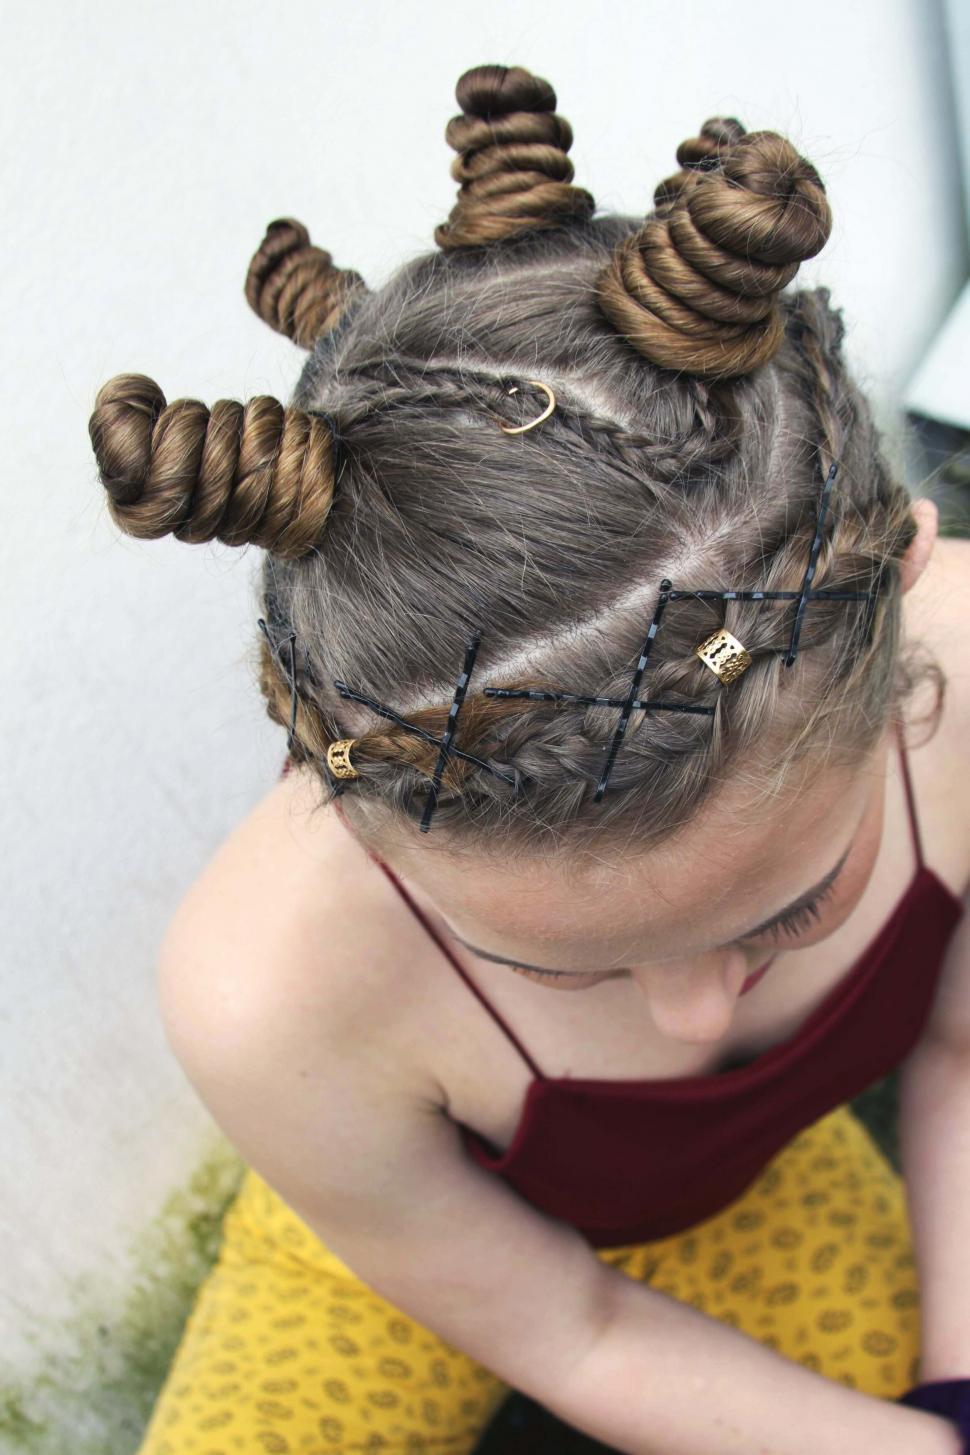 Free Image of Creative hairstyle with buns and braids 